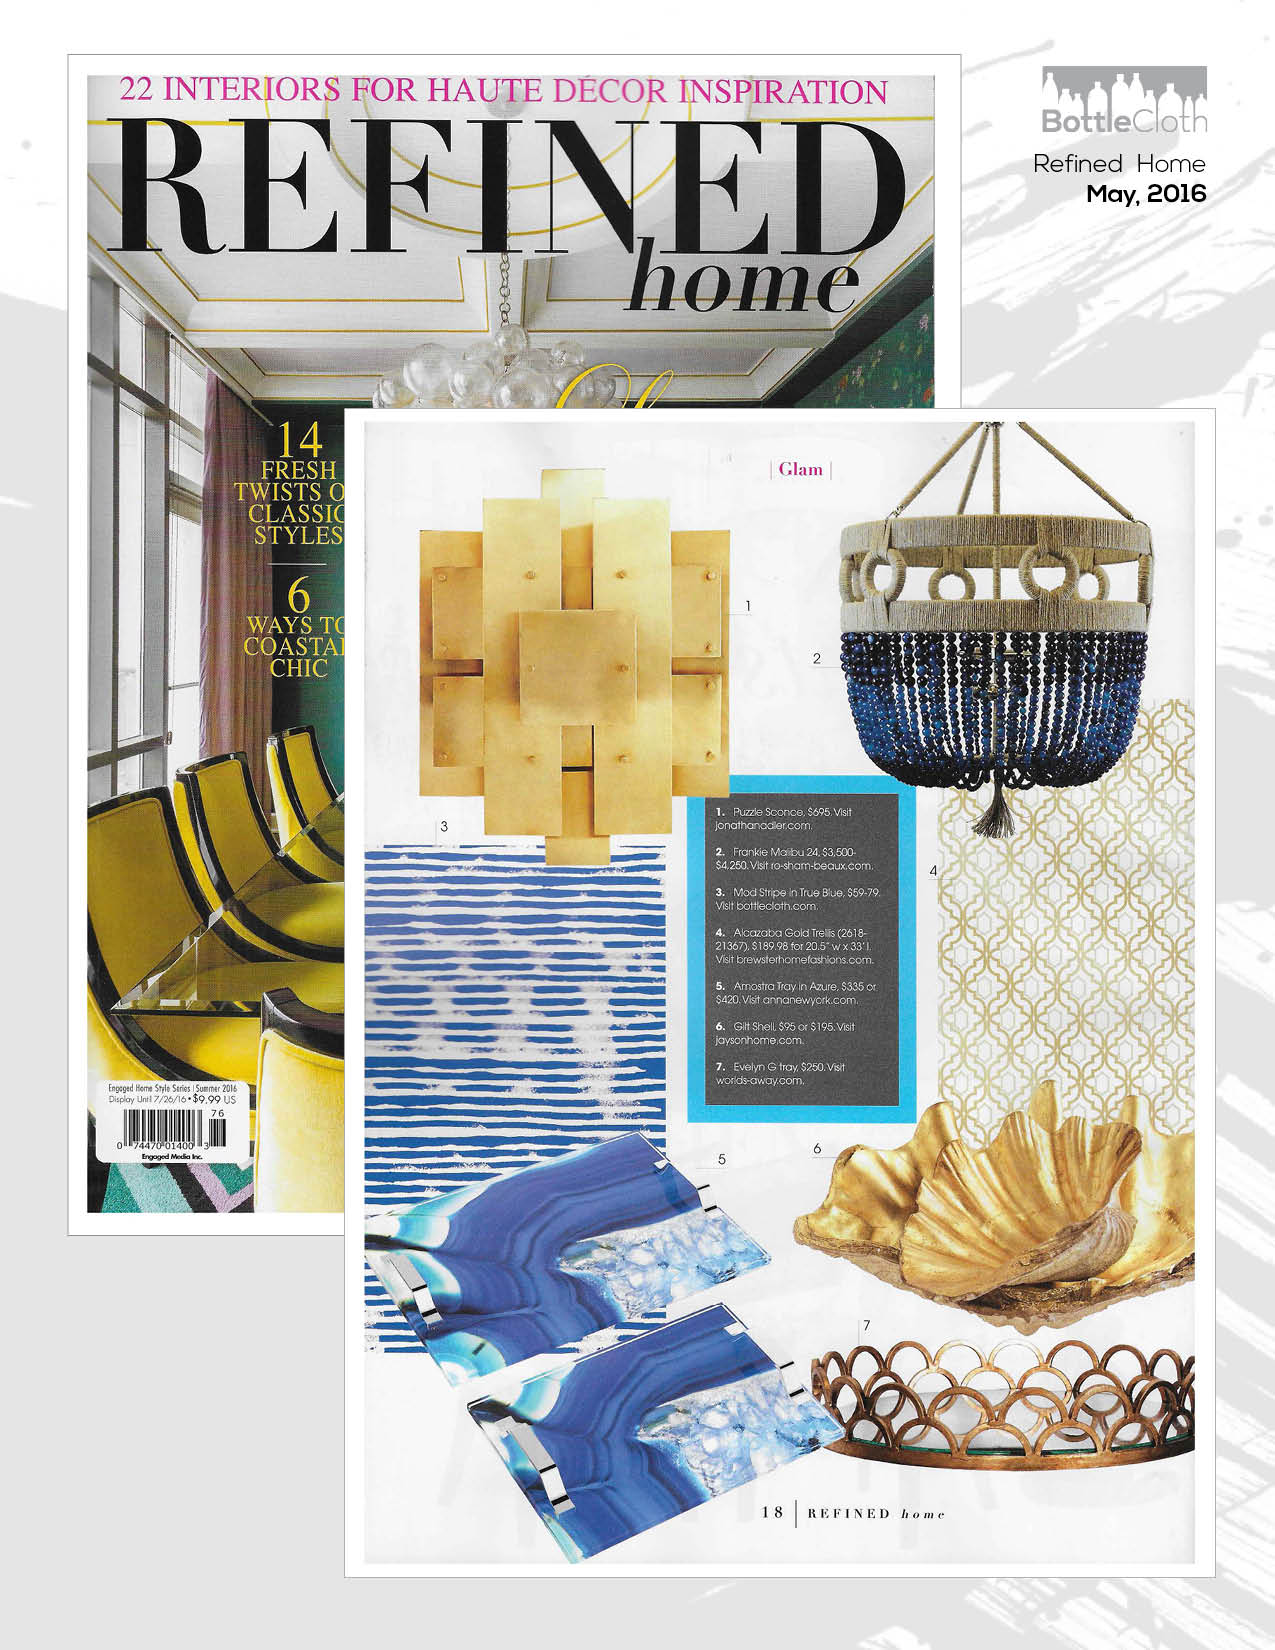 BottleCloth Press - Refined Home